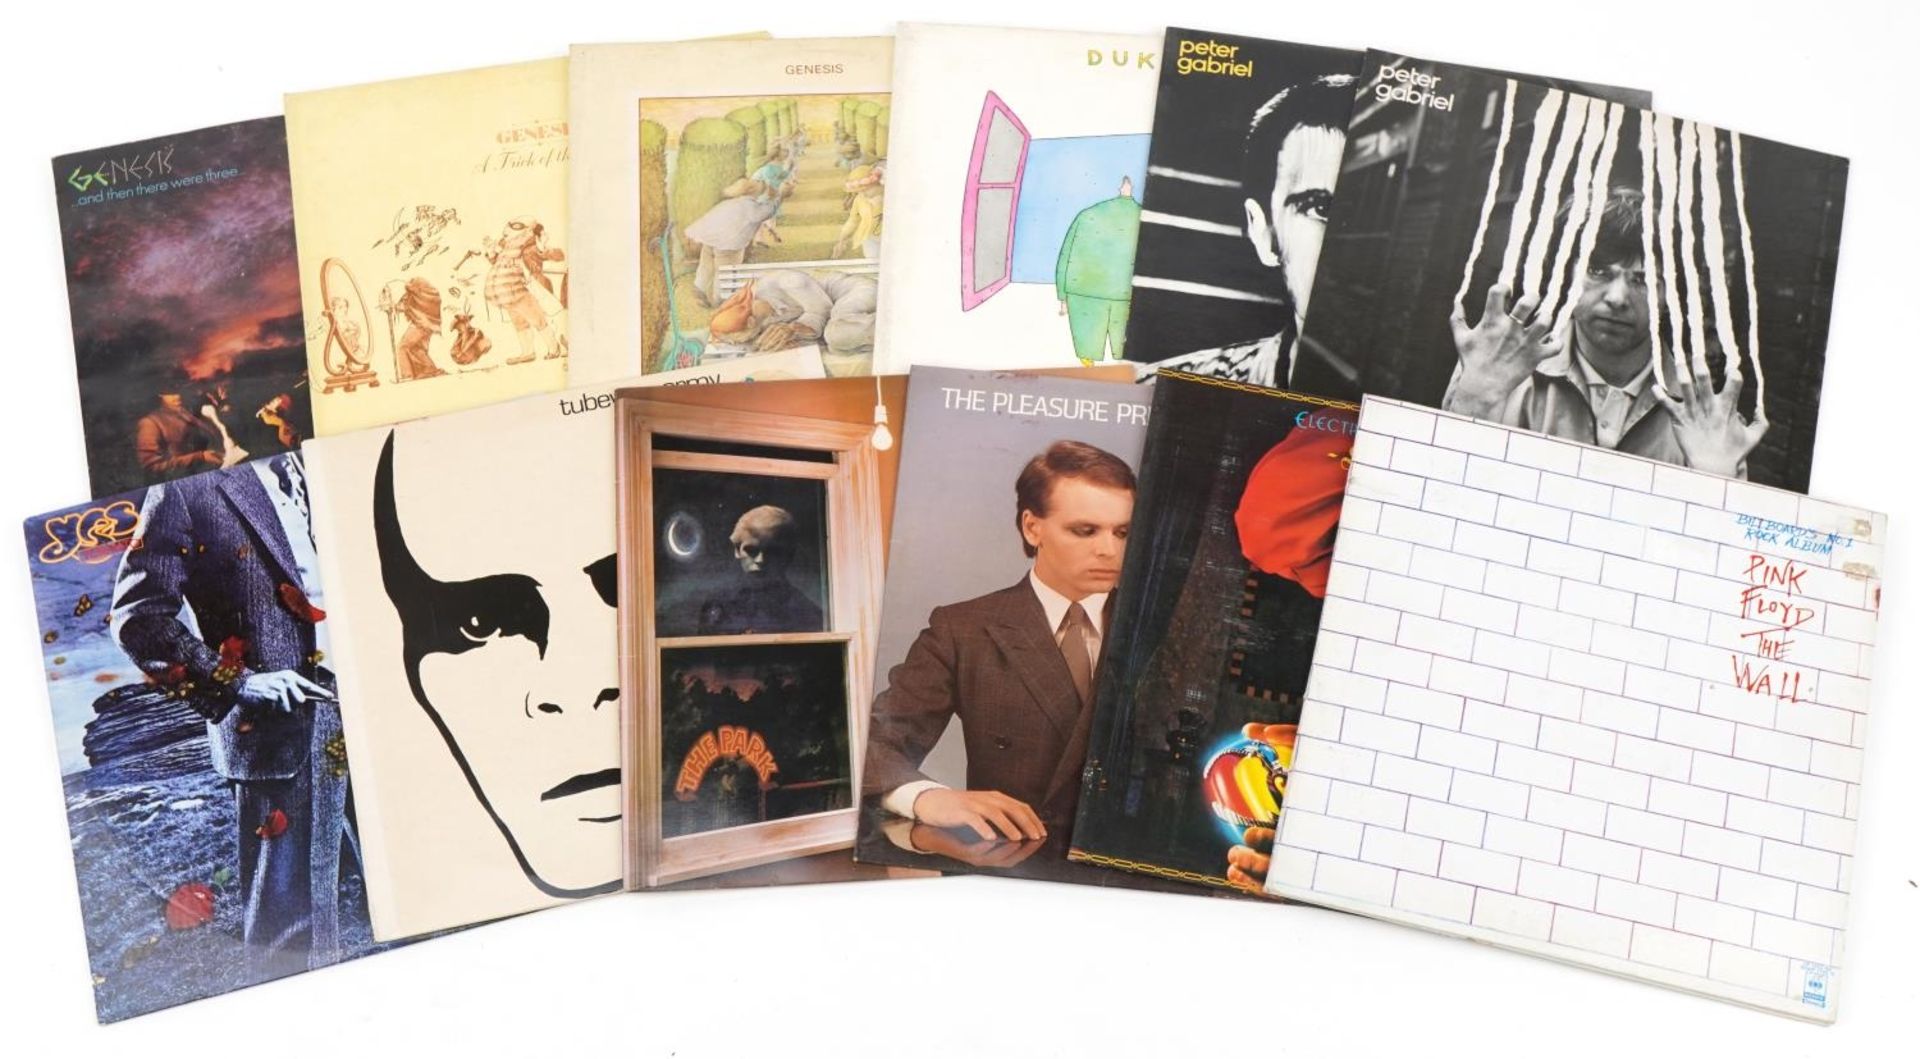 Vinyl LP records including Pink Floyd and Genesis : For further information on this lot please visit